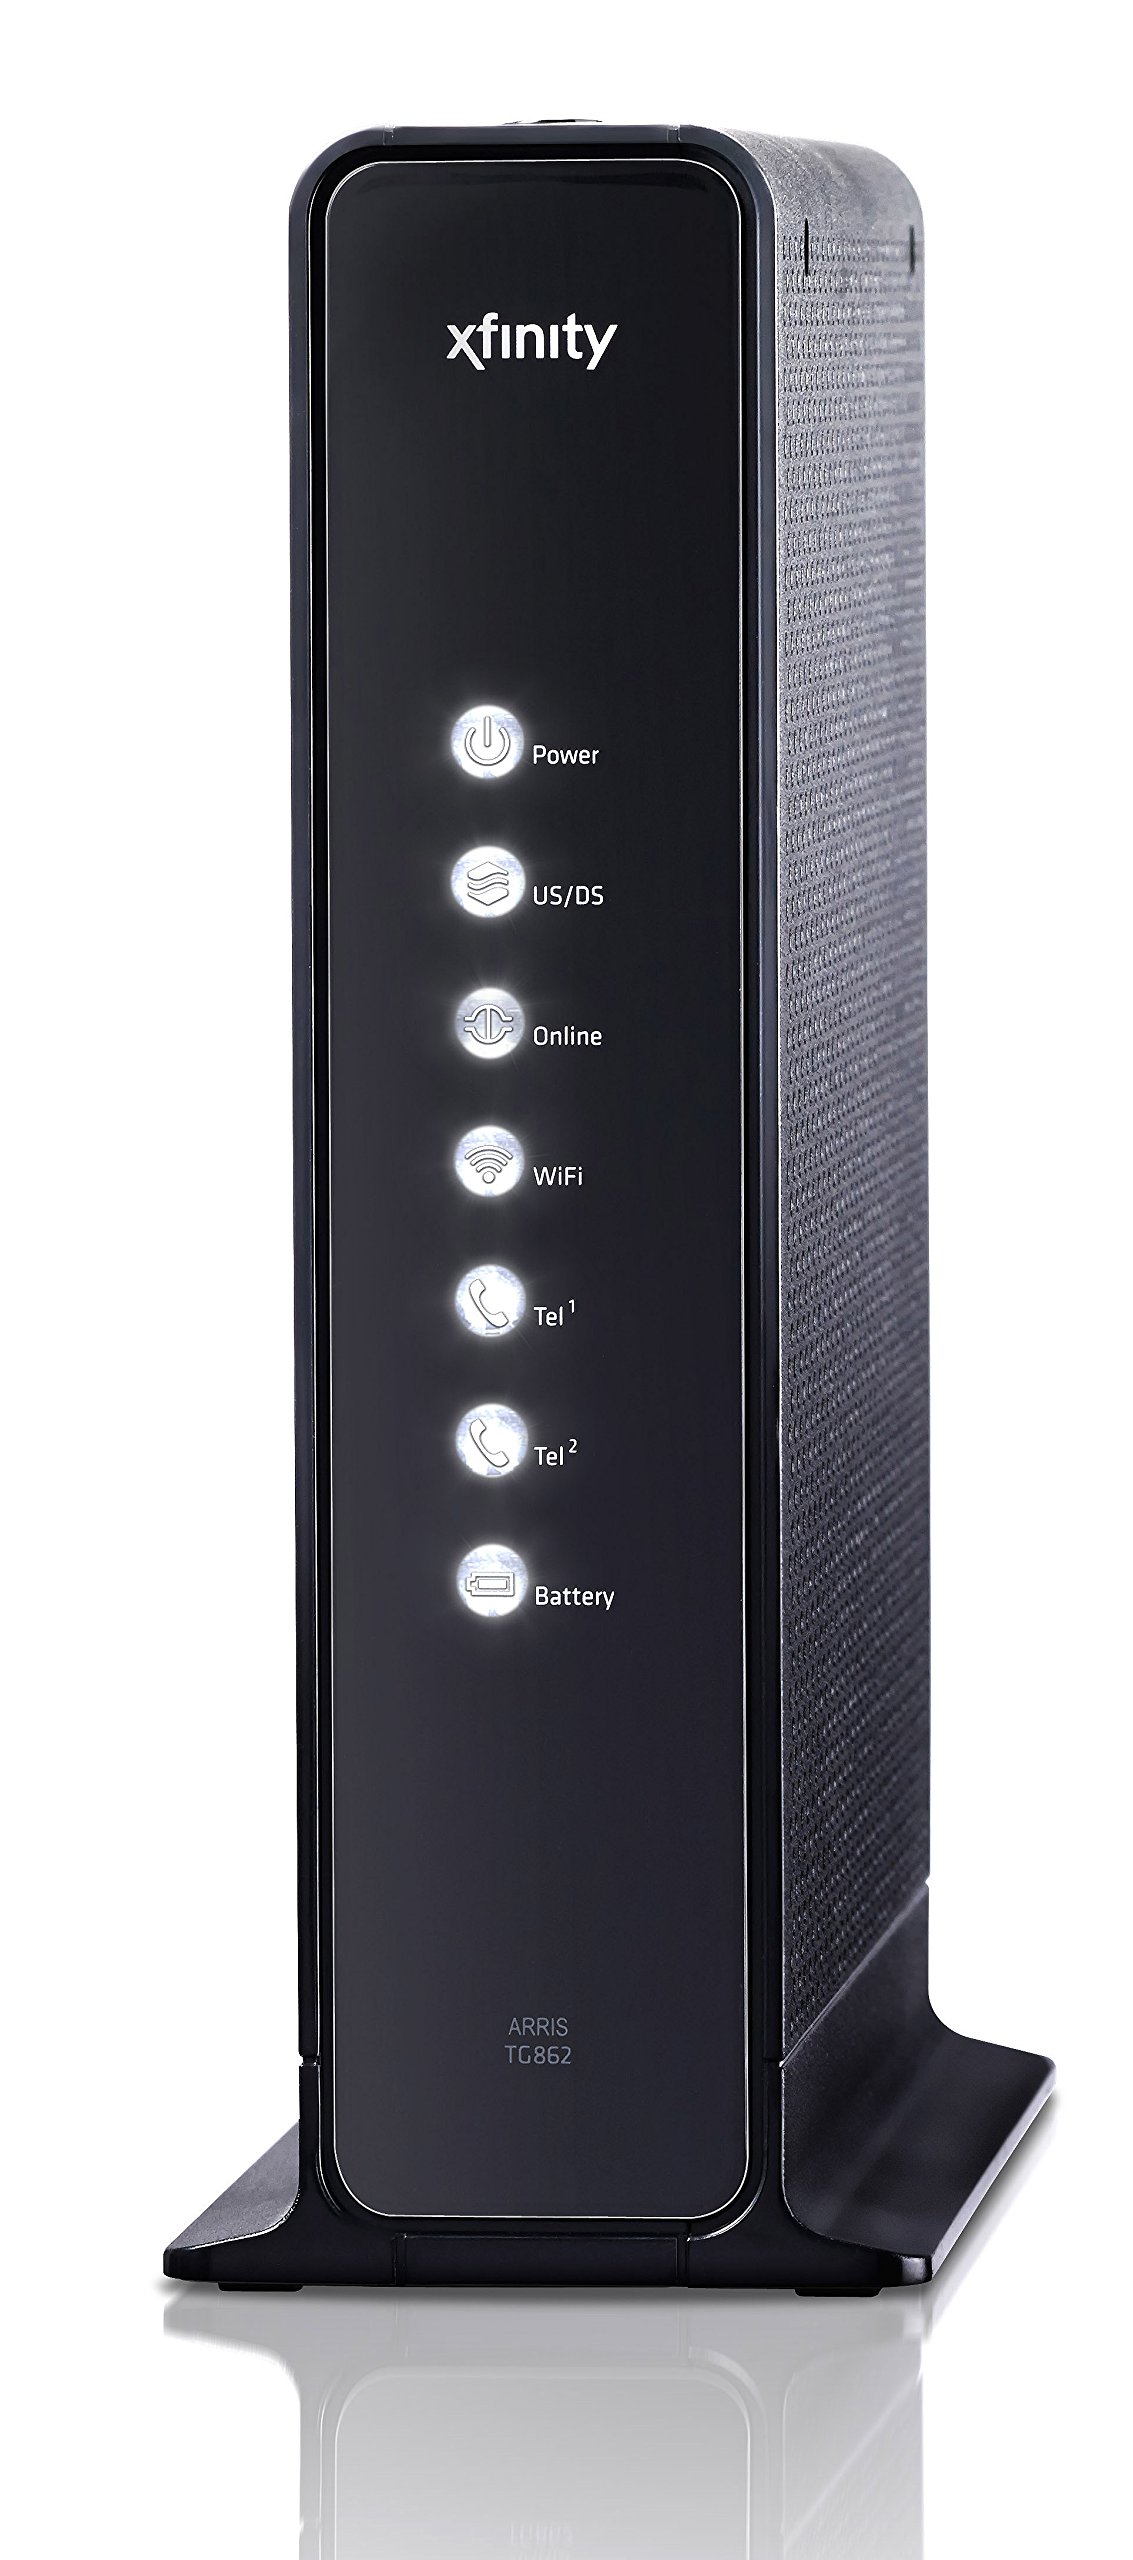 ARRIS DOCSIS 3.0 Residential Gateway with 802.11n/ 4 GigaPort Router/ 2-Voice Lines Certified with Comcast (TG862G-CT)